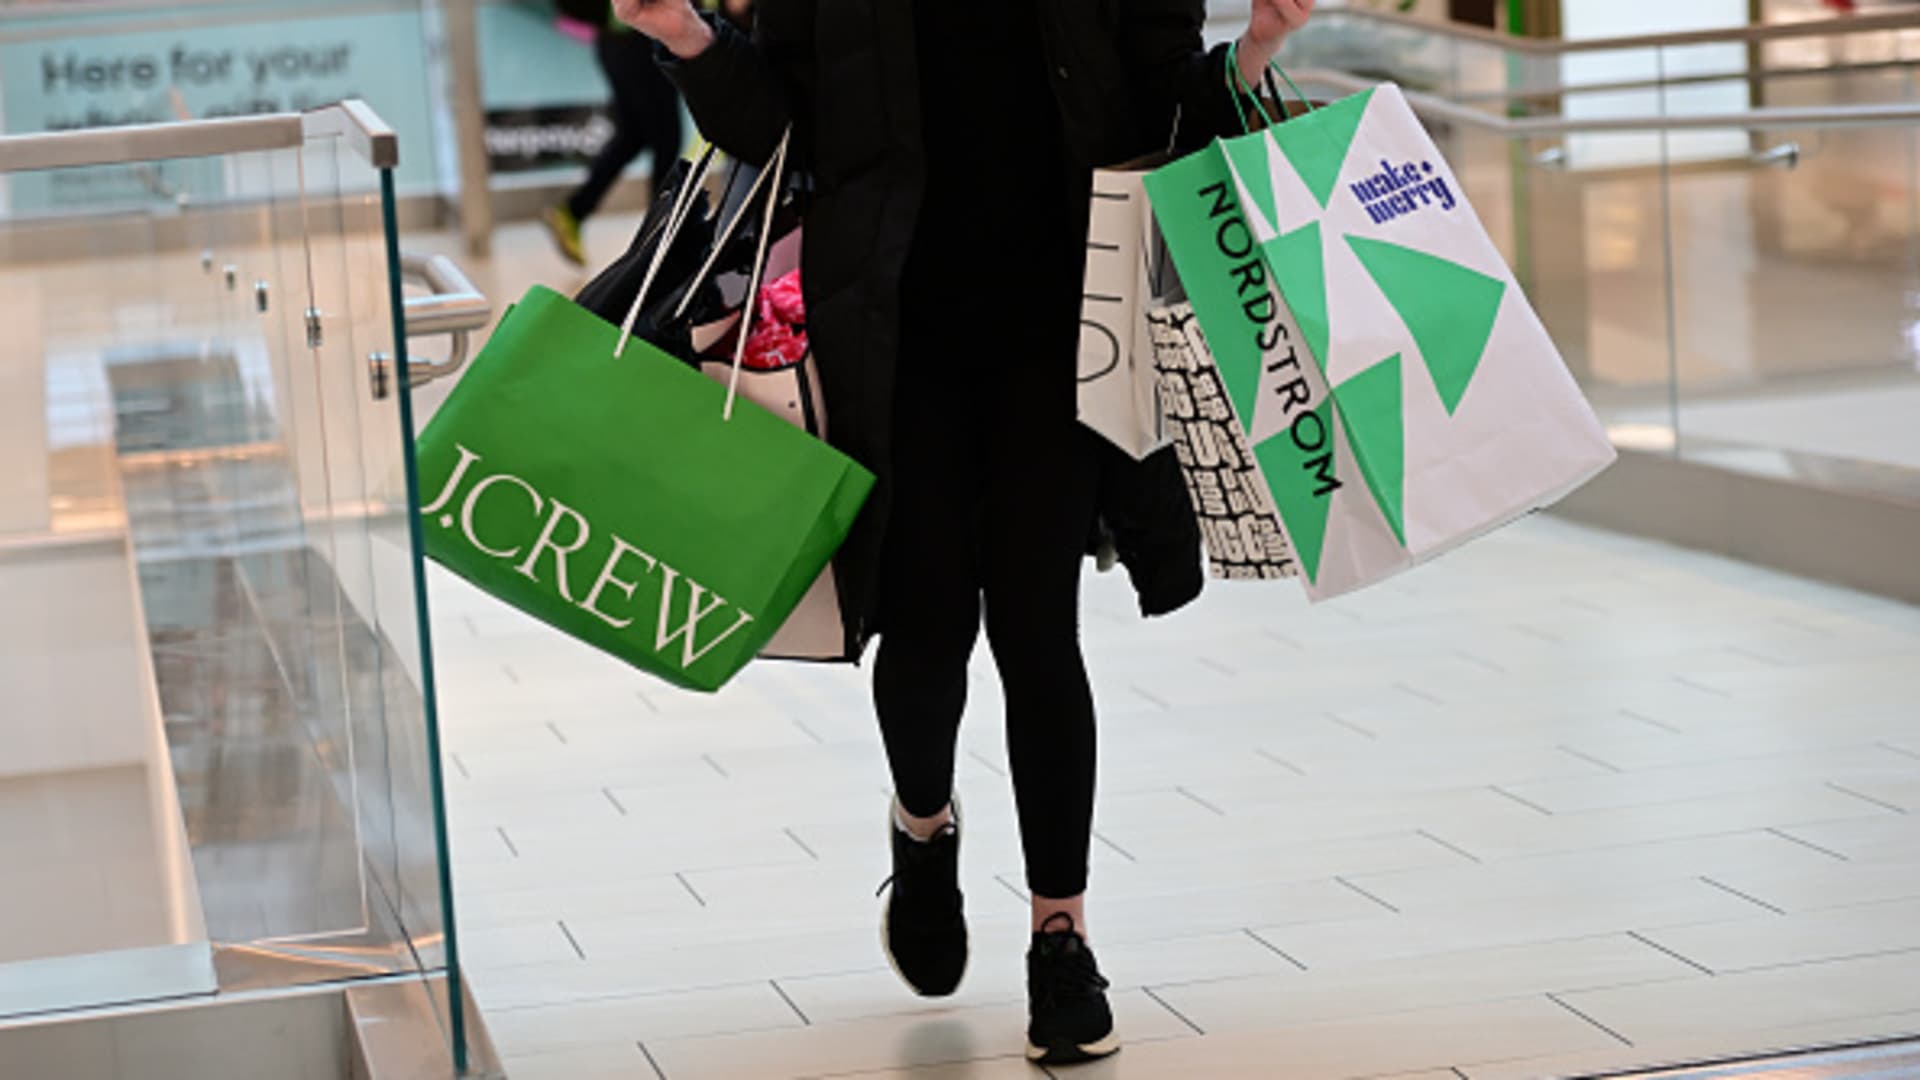 Sales fall 0.6% as consumers feel pressure from inflation